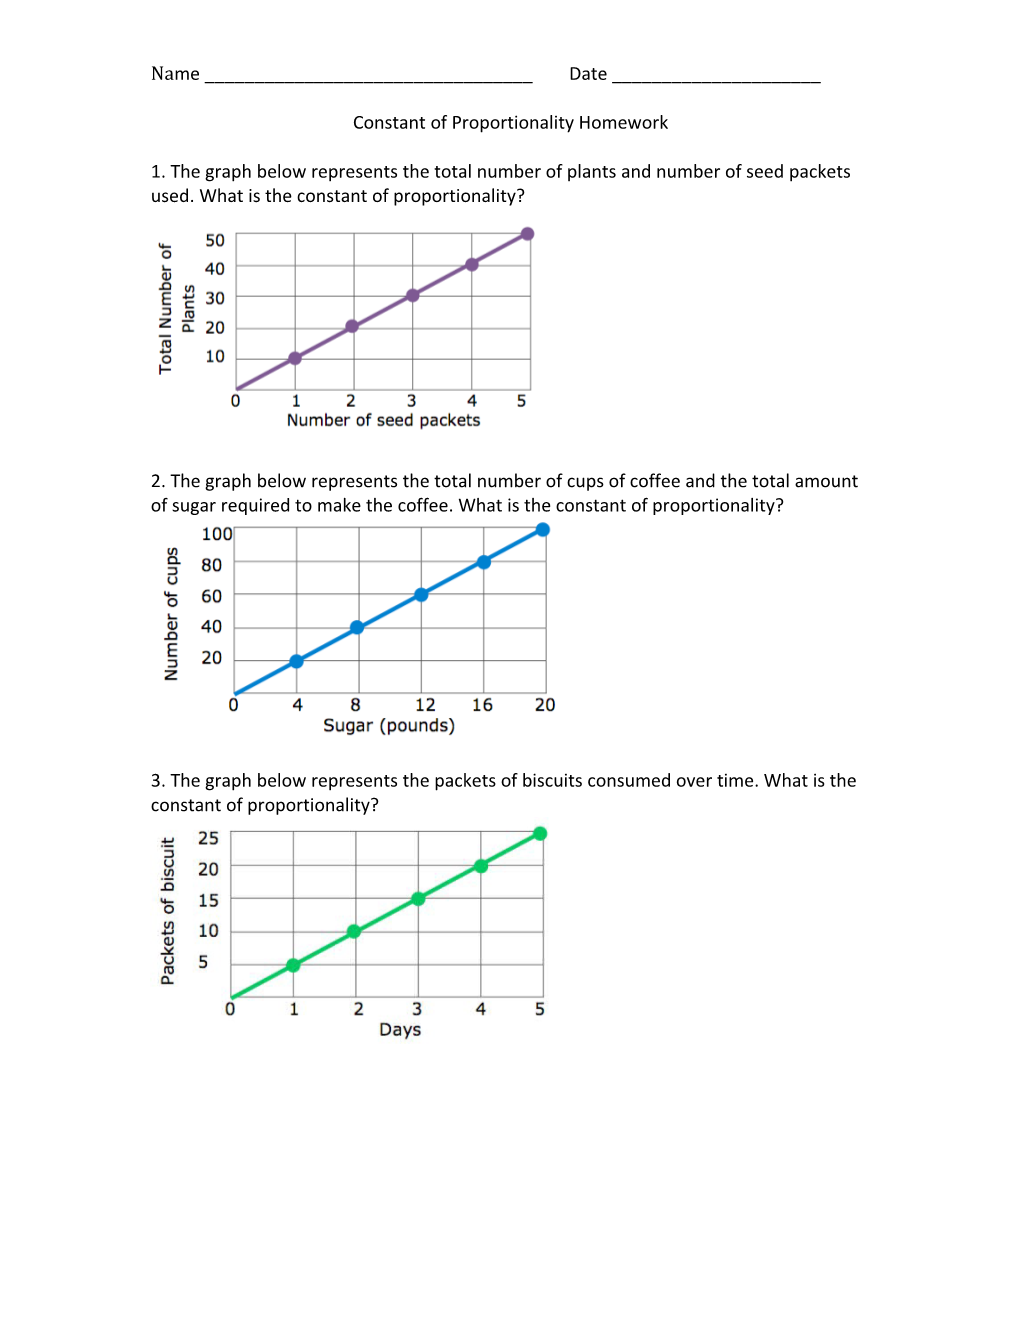 Constant of Proportionalityhomework